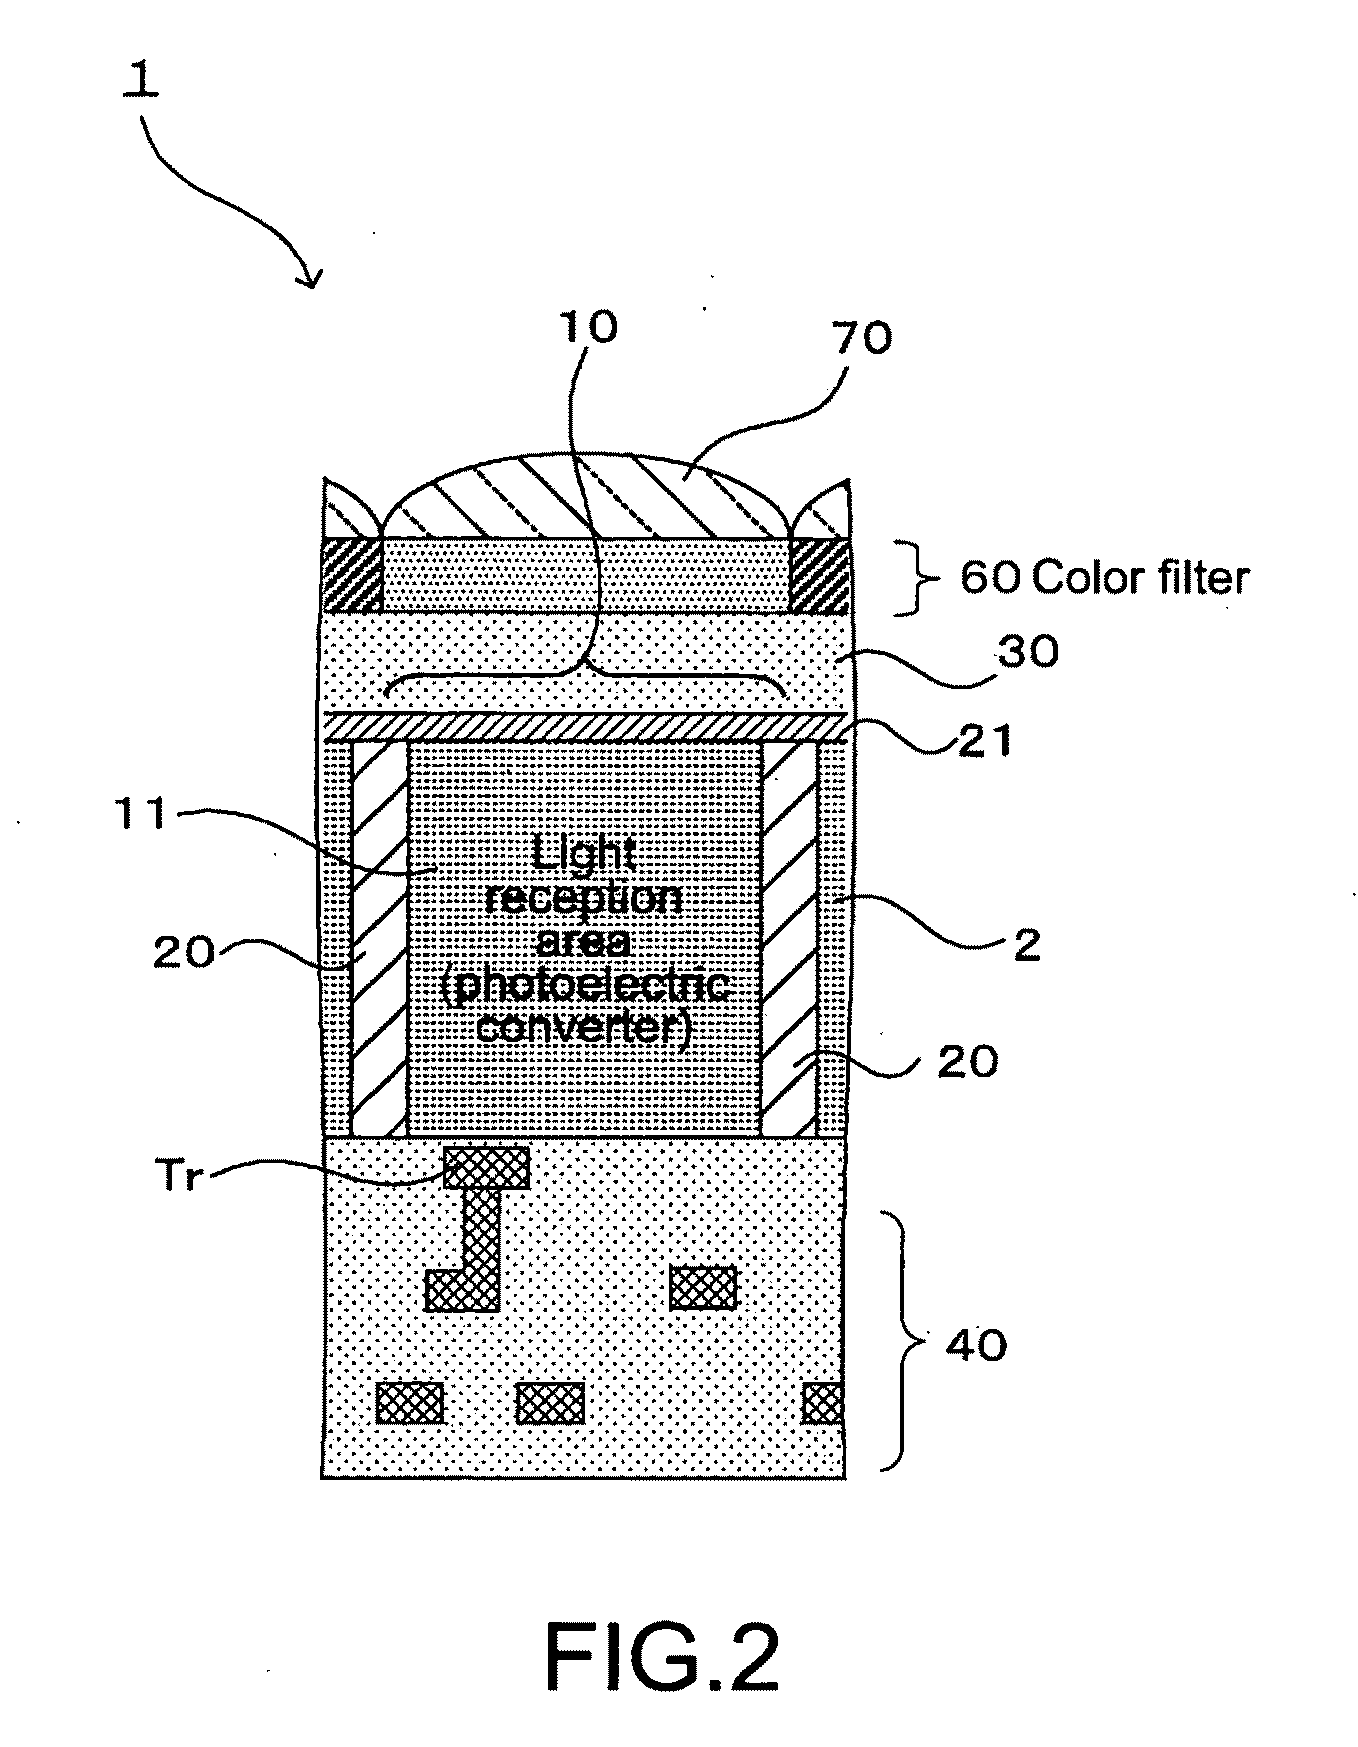 Solid-state image pickup apparatus and electronic apparatus